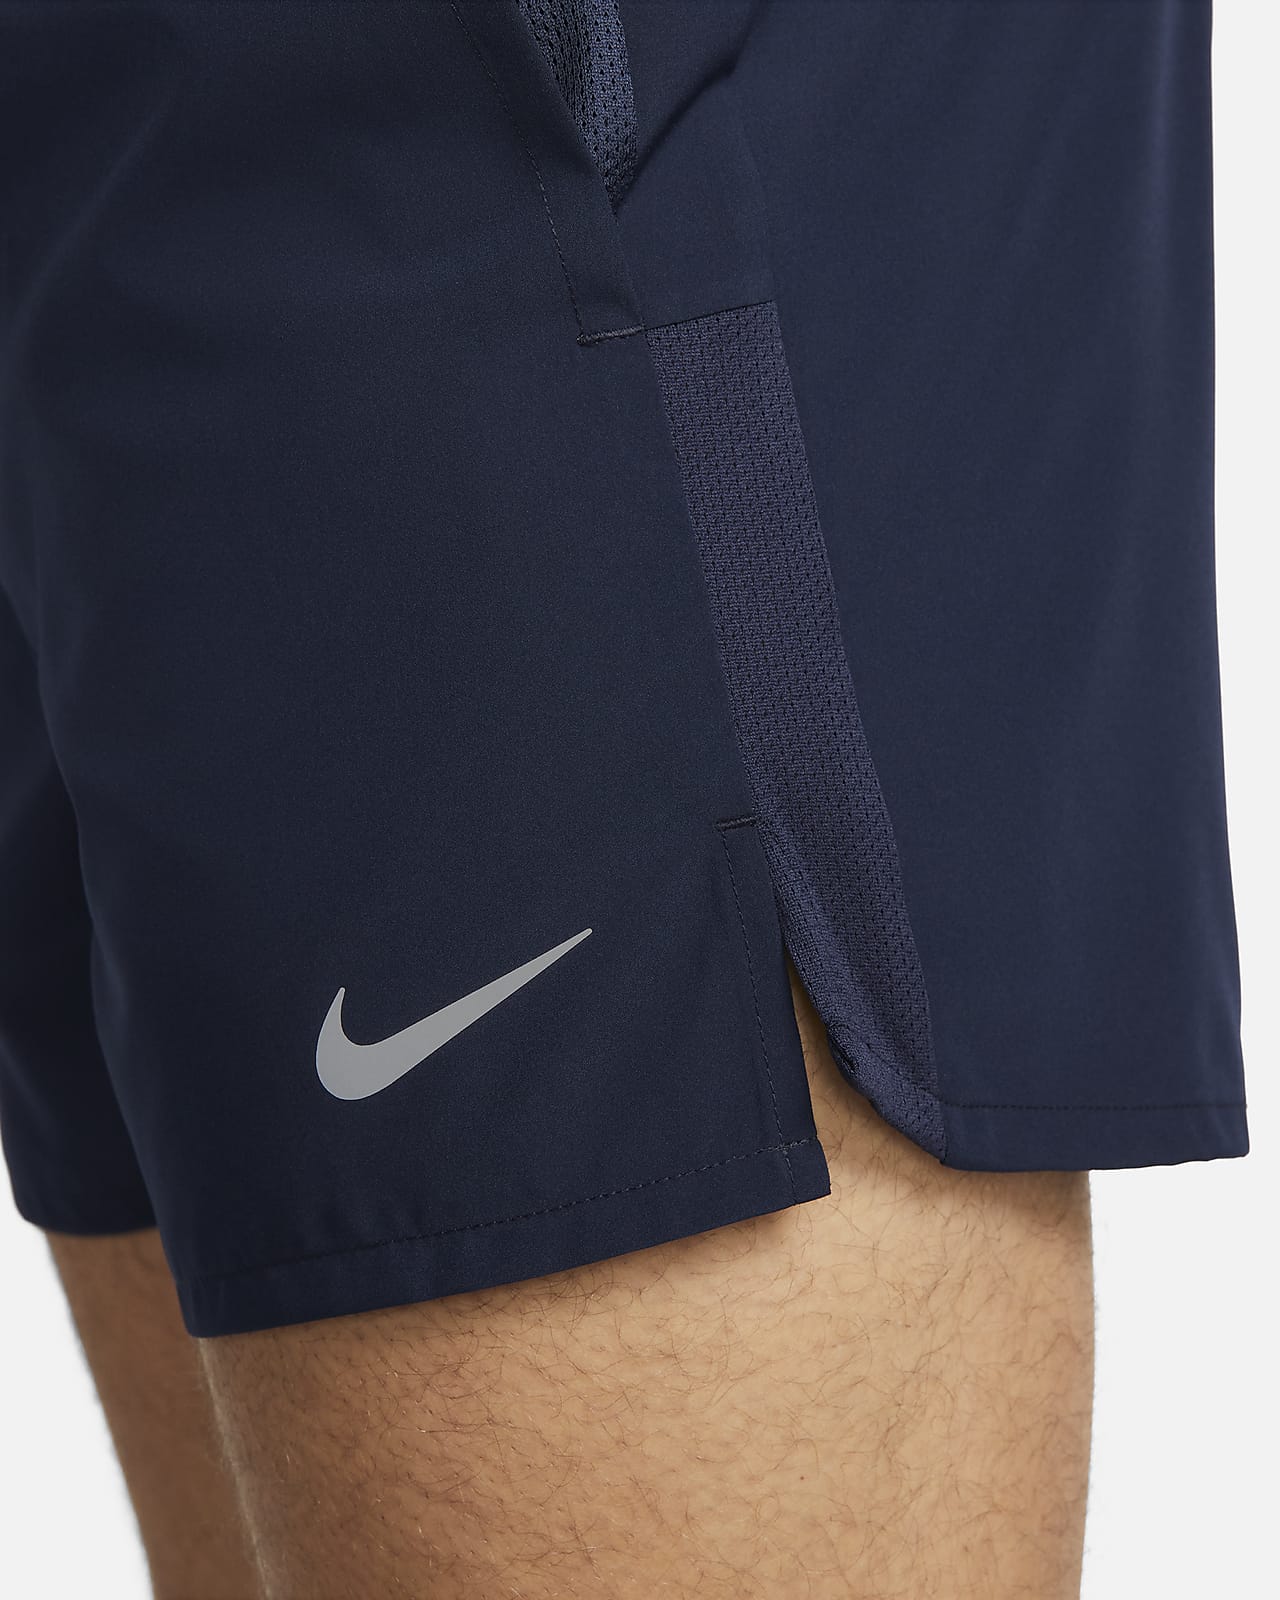 Nike Challenger Men's Dri-FIT 5" Brief-Lined Running Shorts.